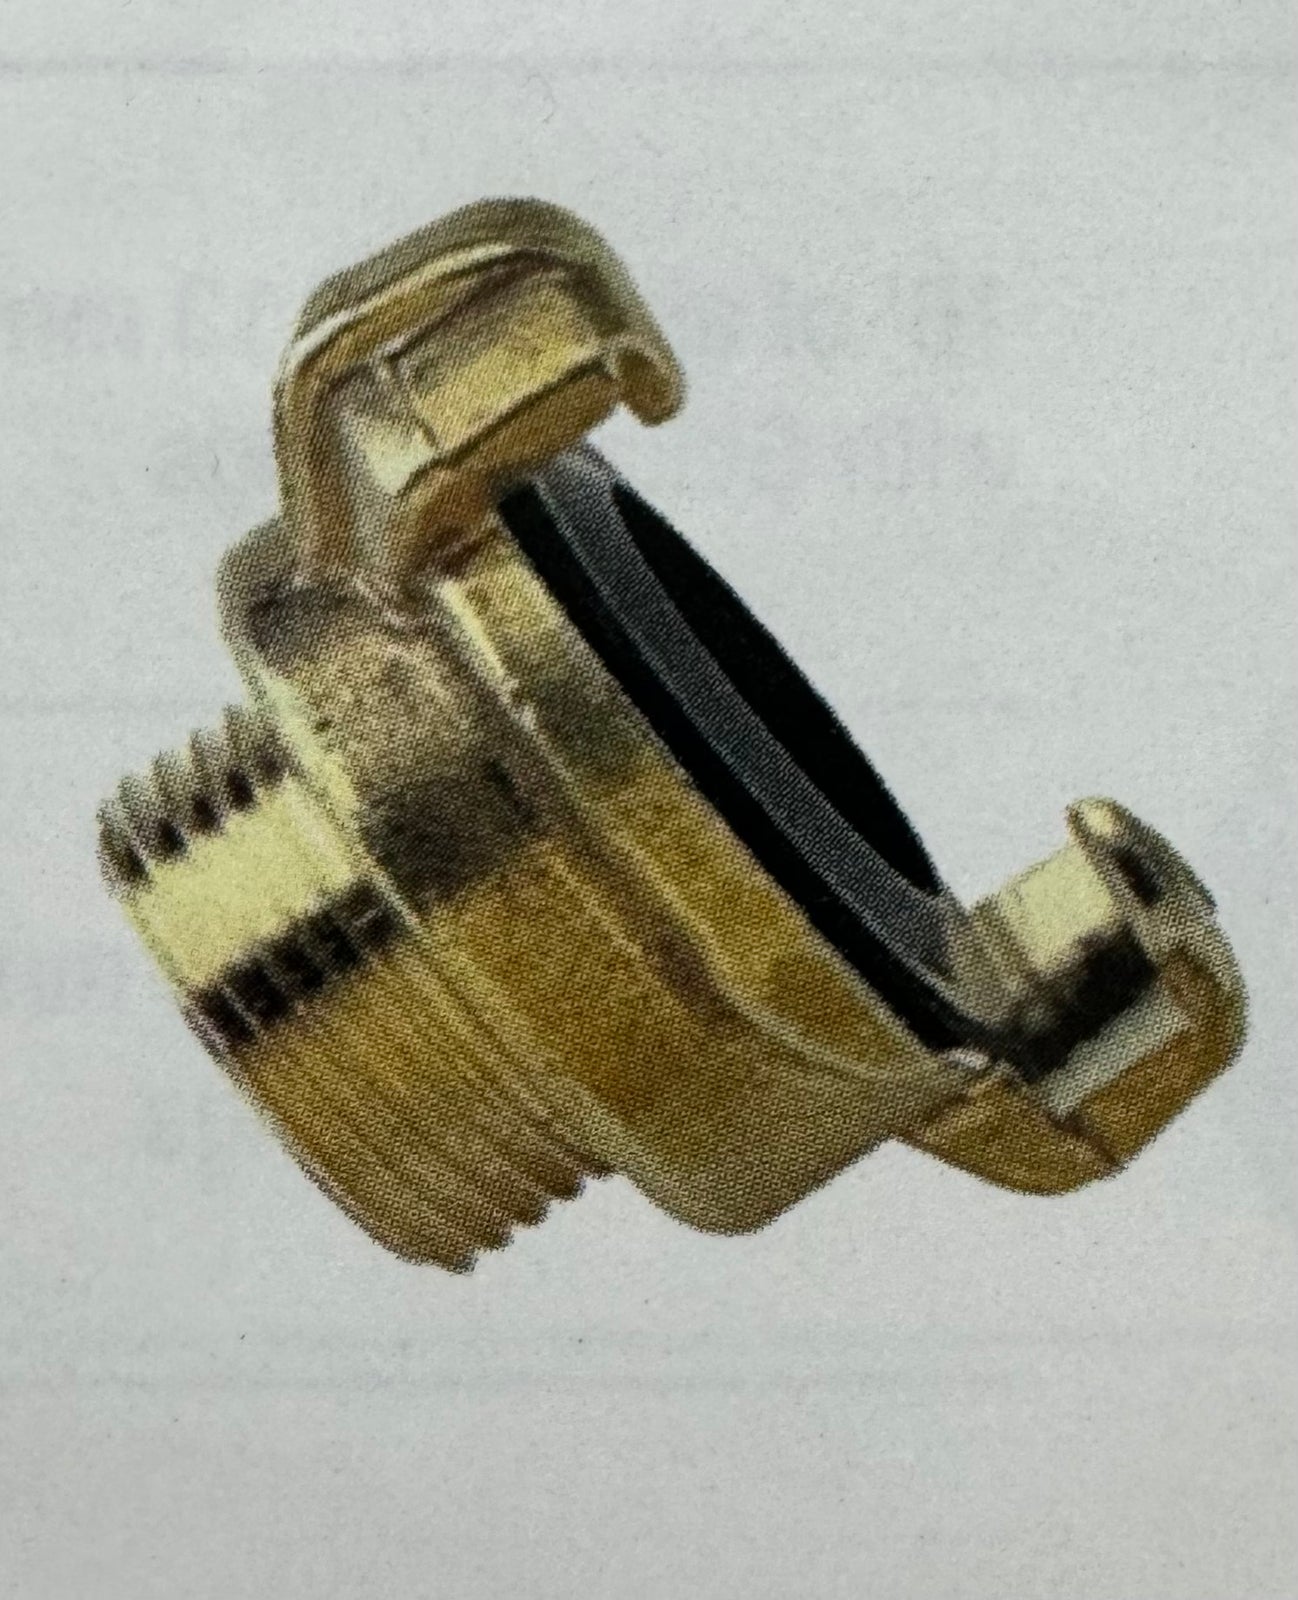 PN 3223614 - Geka Style Fitting to 3/4” Male hose thread end for IMER Koine 35 / 4 pumps